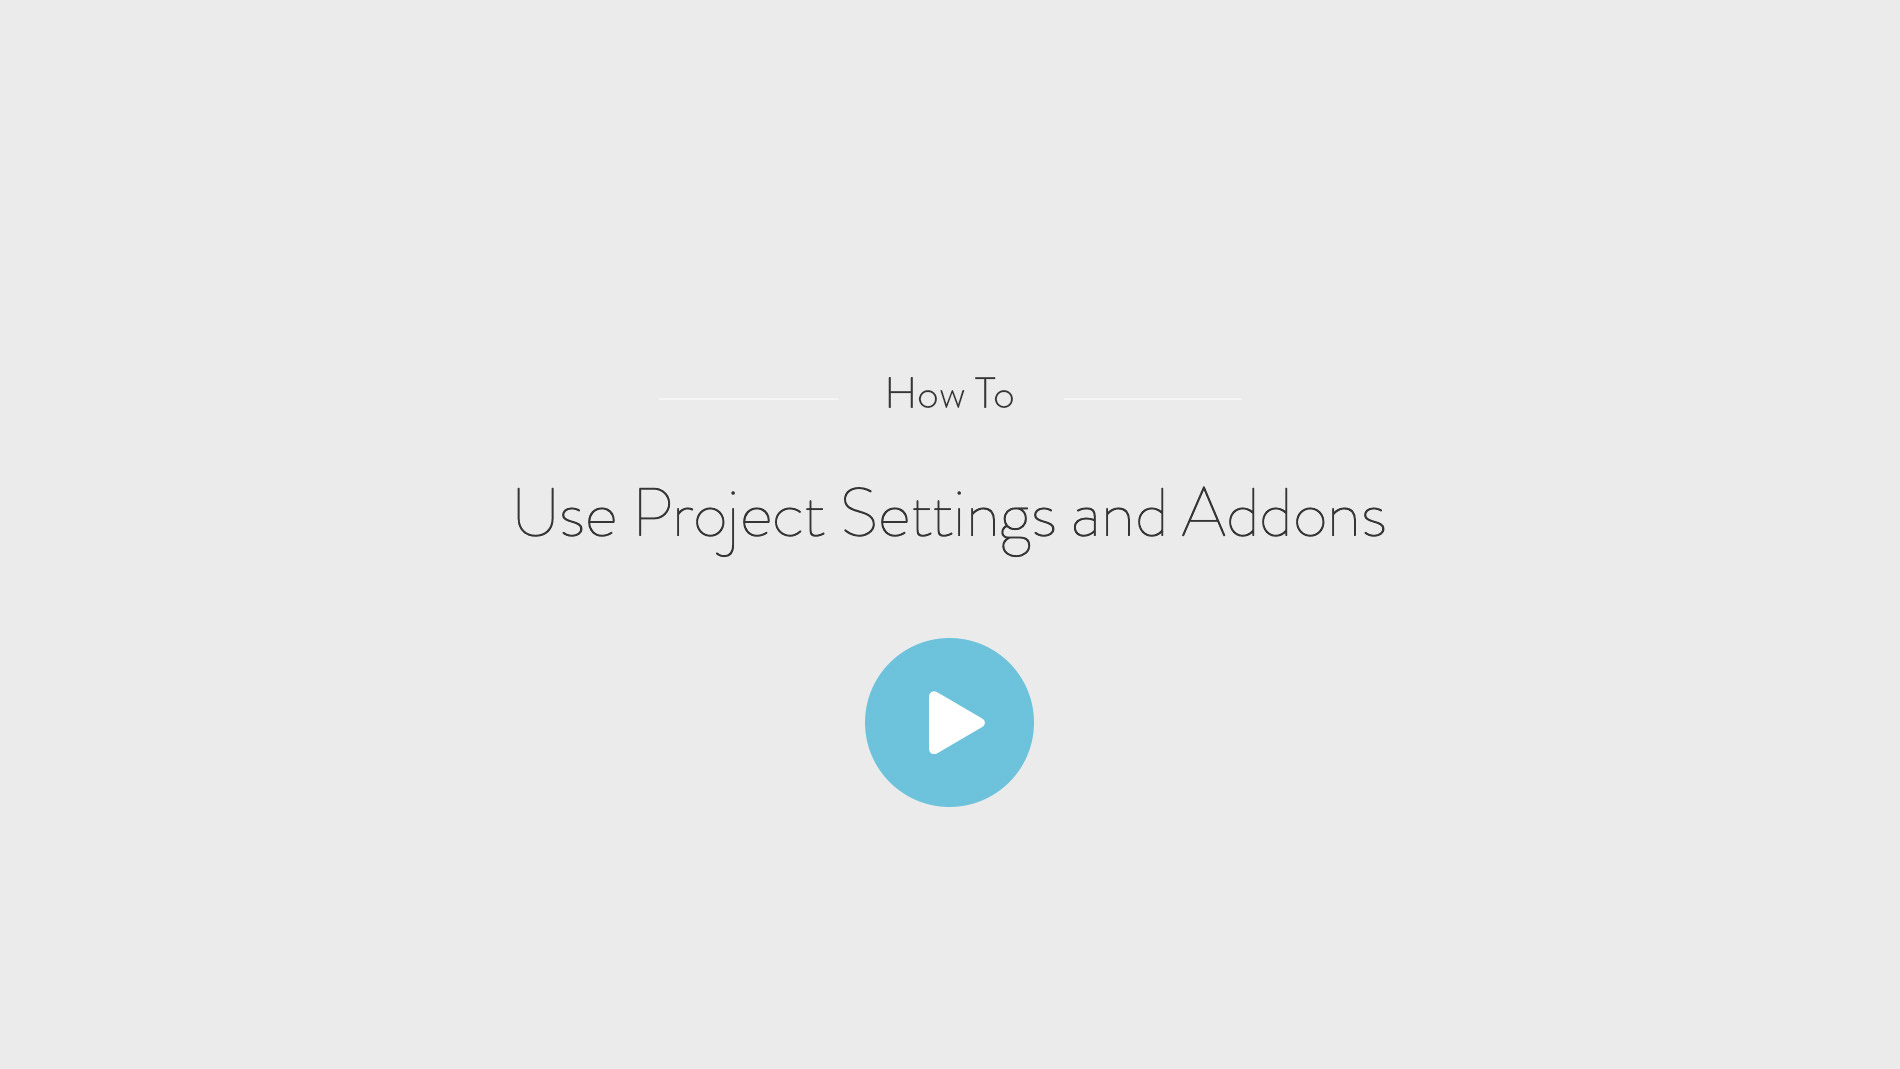 How to - Use project settings and addons